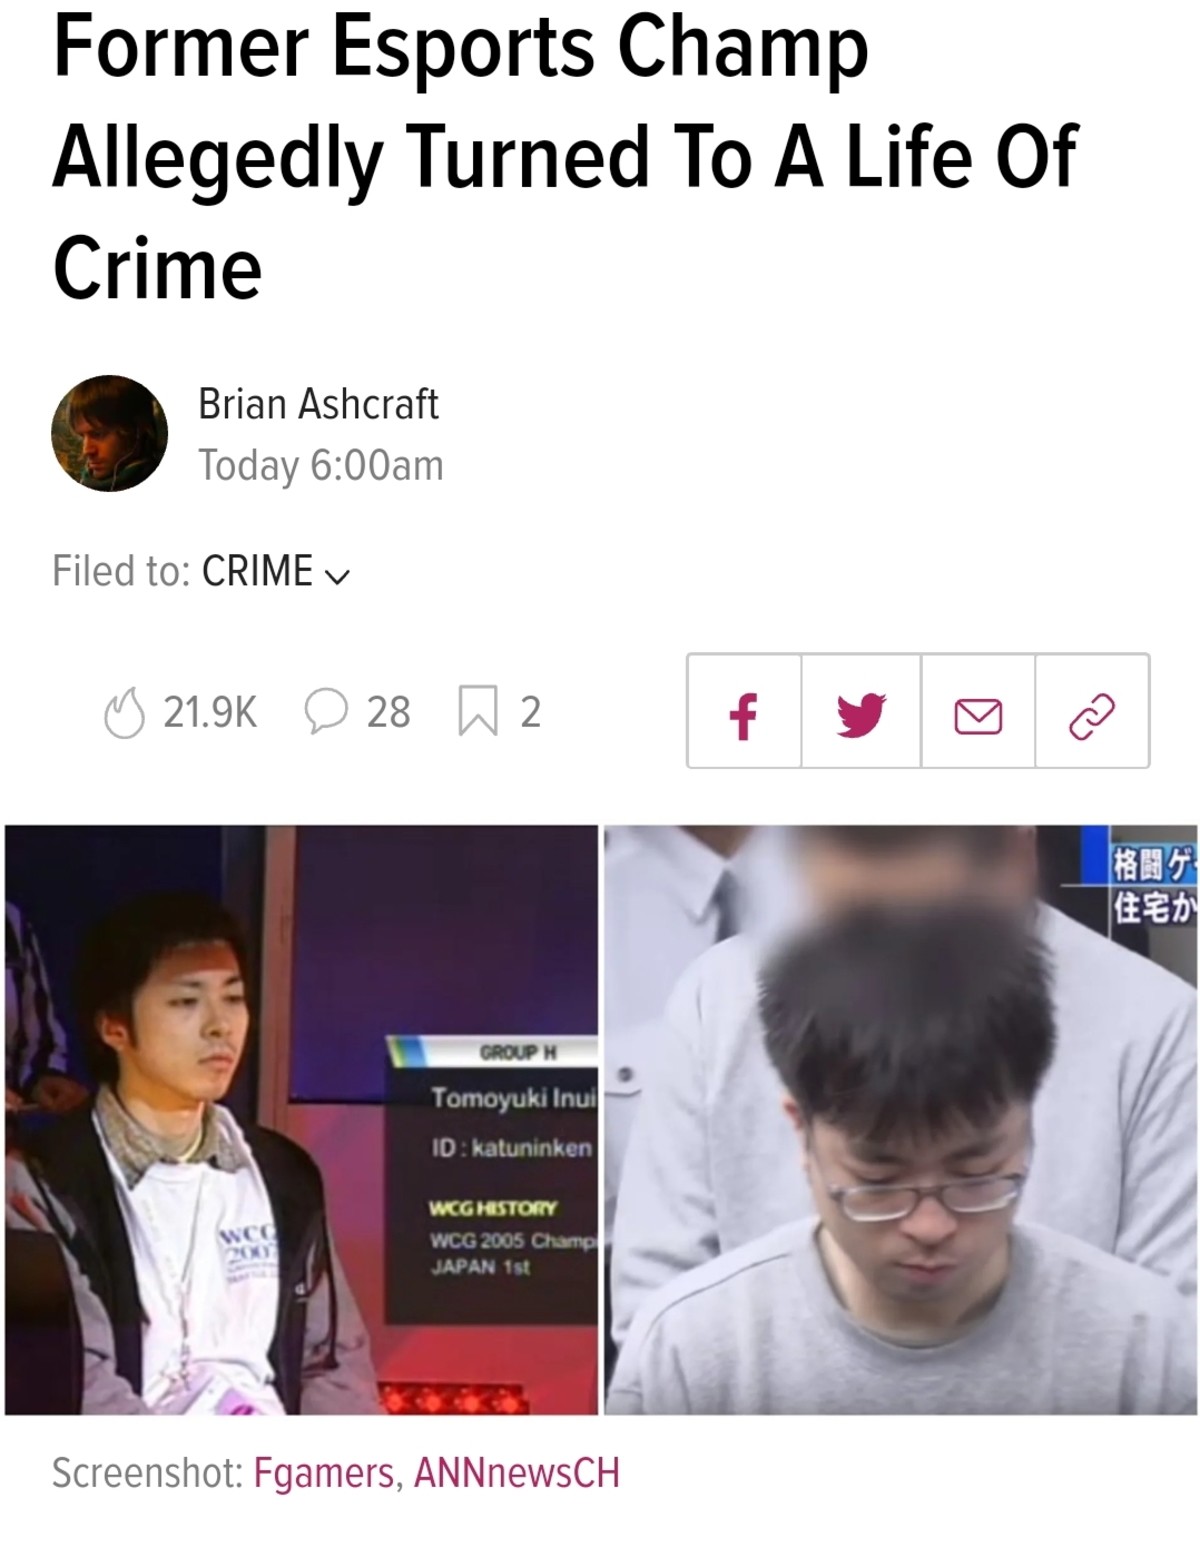 How the mighty have fallen. .. Ganing is just not a secure career. Ik alot of kids who &quot;train&quot; to become professional gamers and neglect school for it. Stories like this are perfect